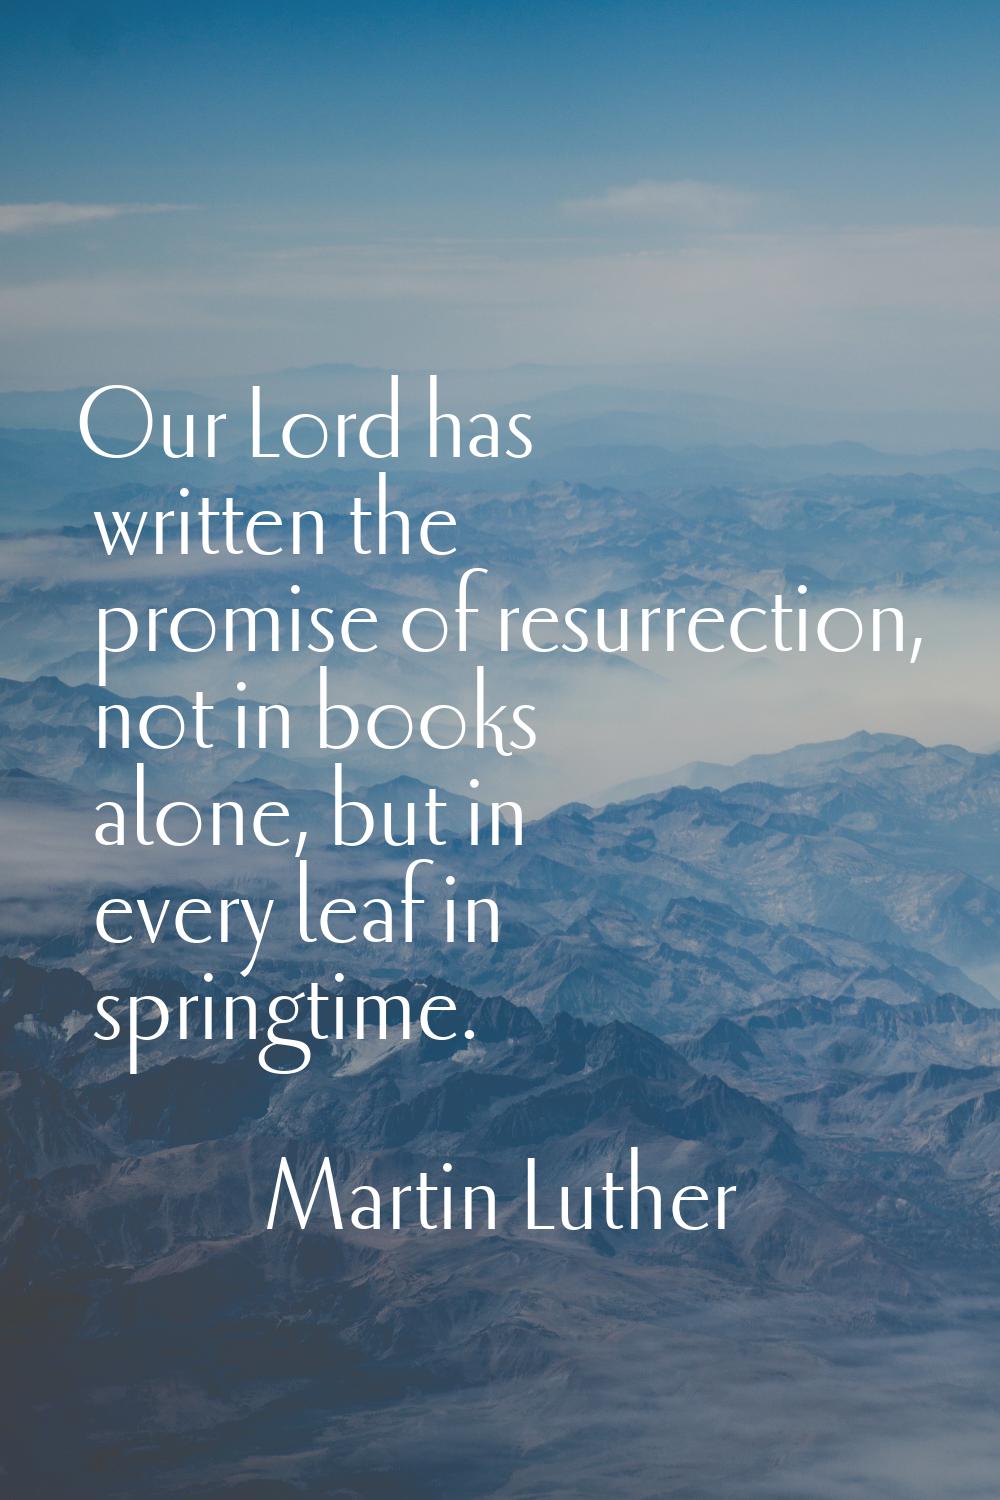 Our Lord has written the promise of resurrection, not in books alone, but in every leaf in springti